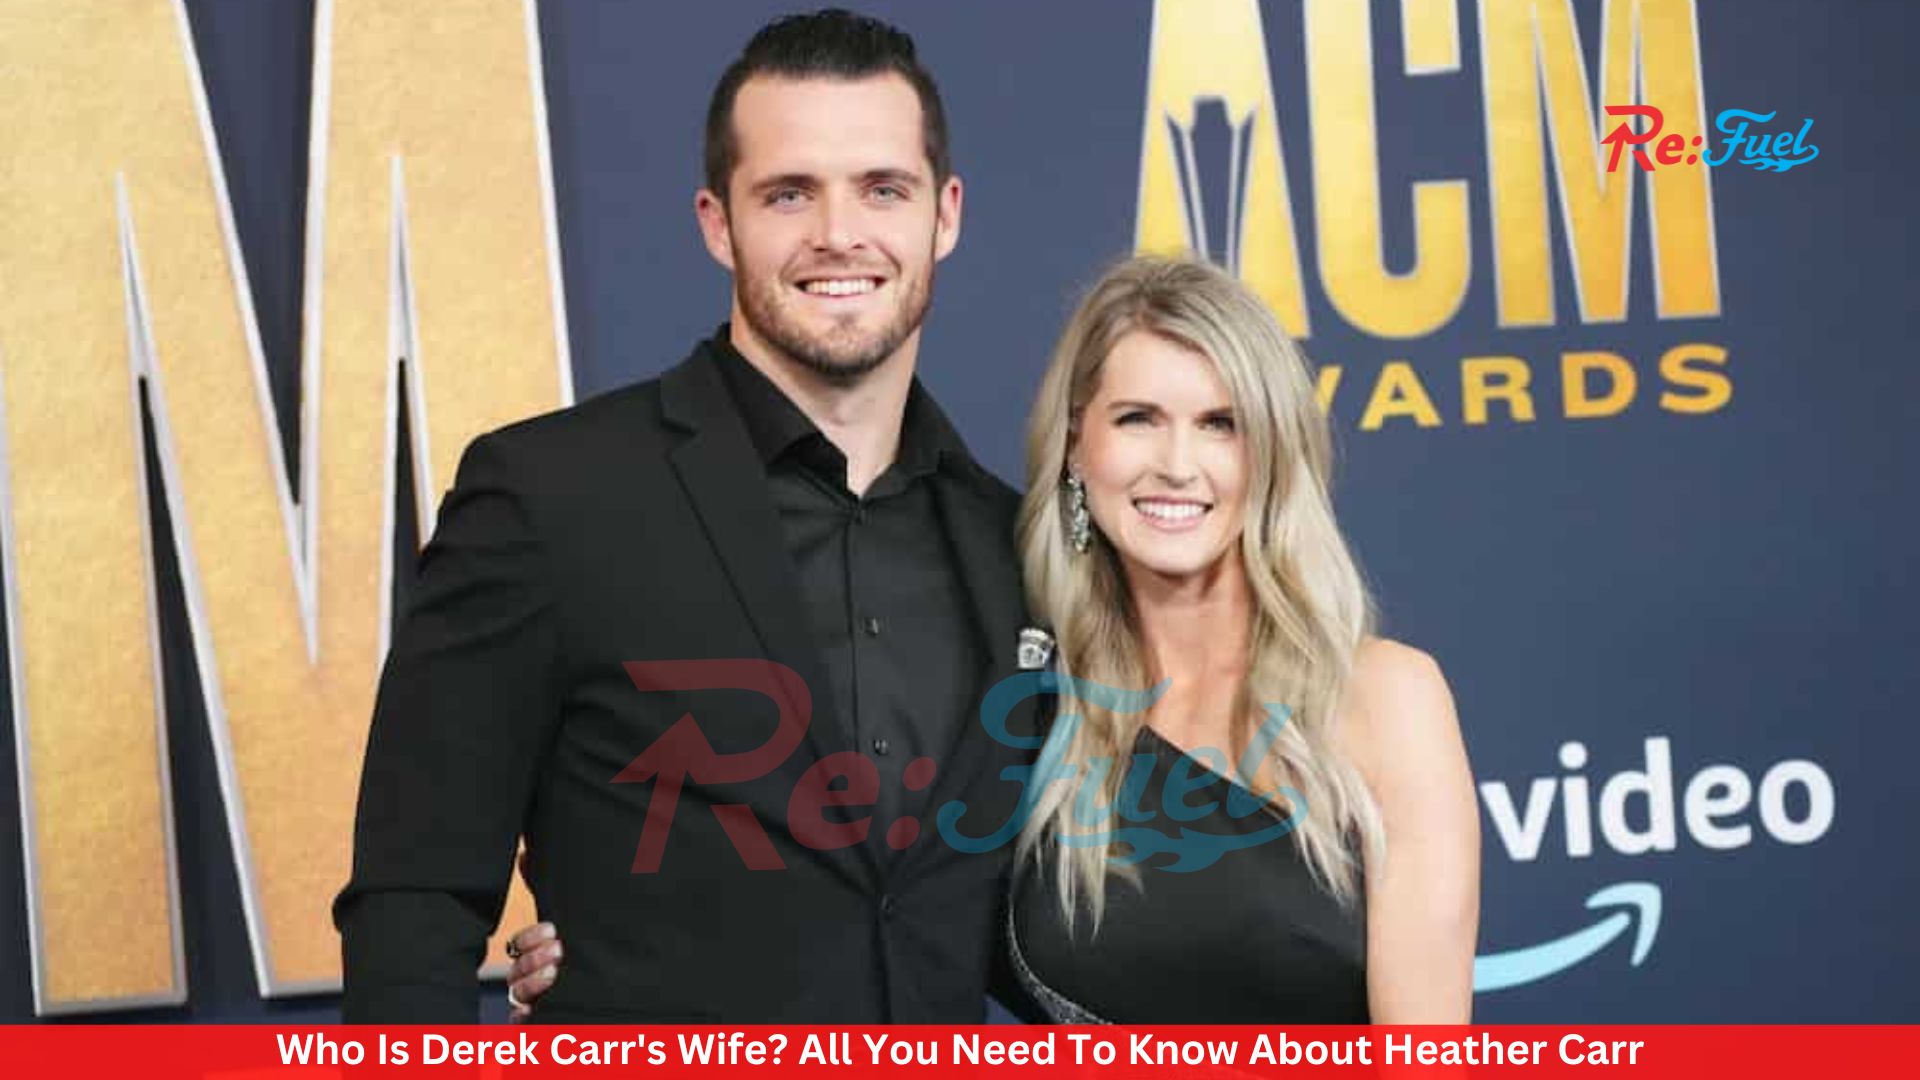 Who Is Derek Carr's Wife? All You Need To Know About Heather Carr